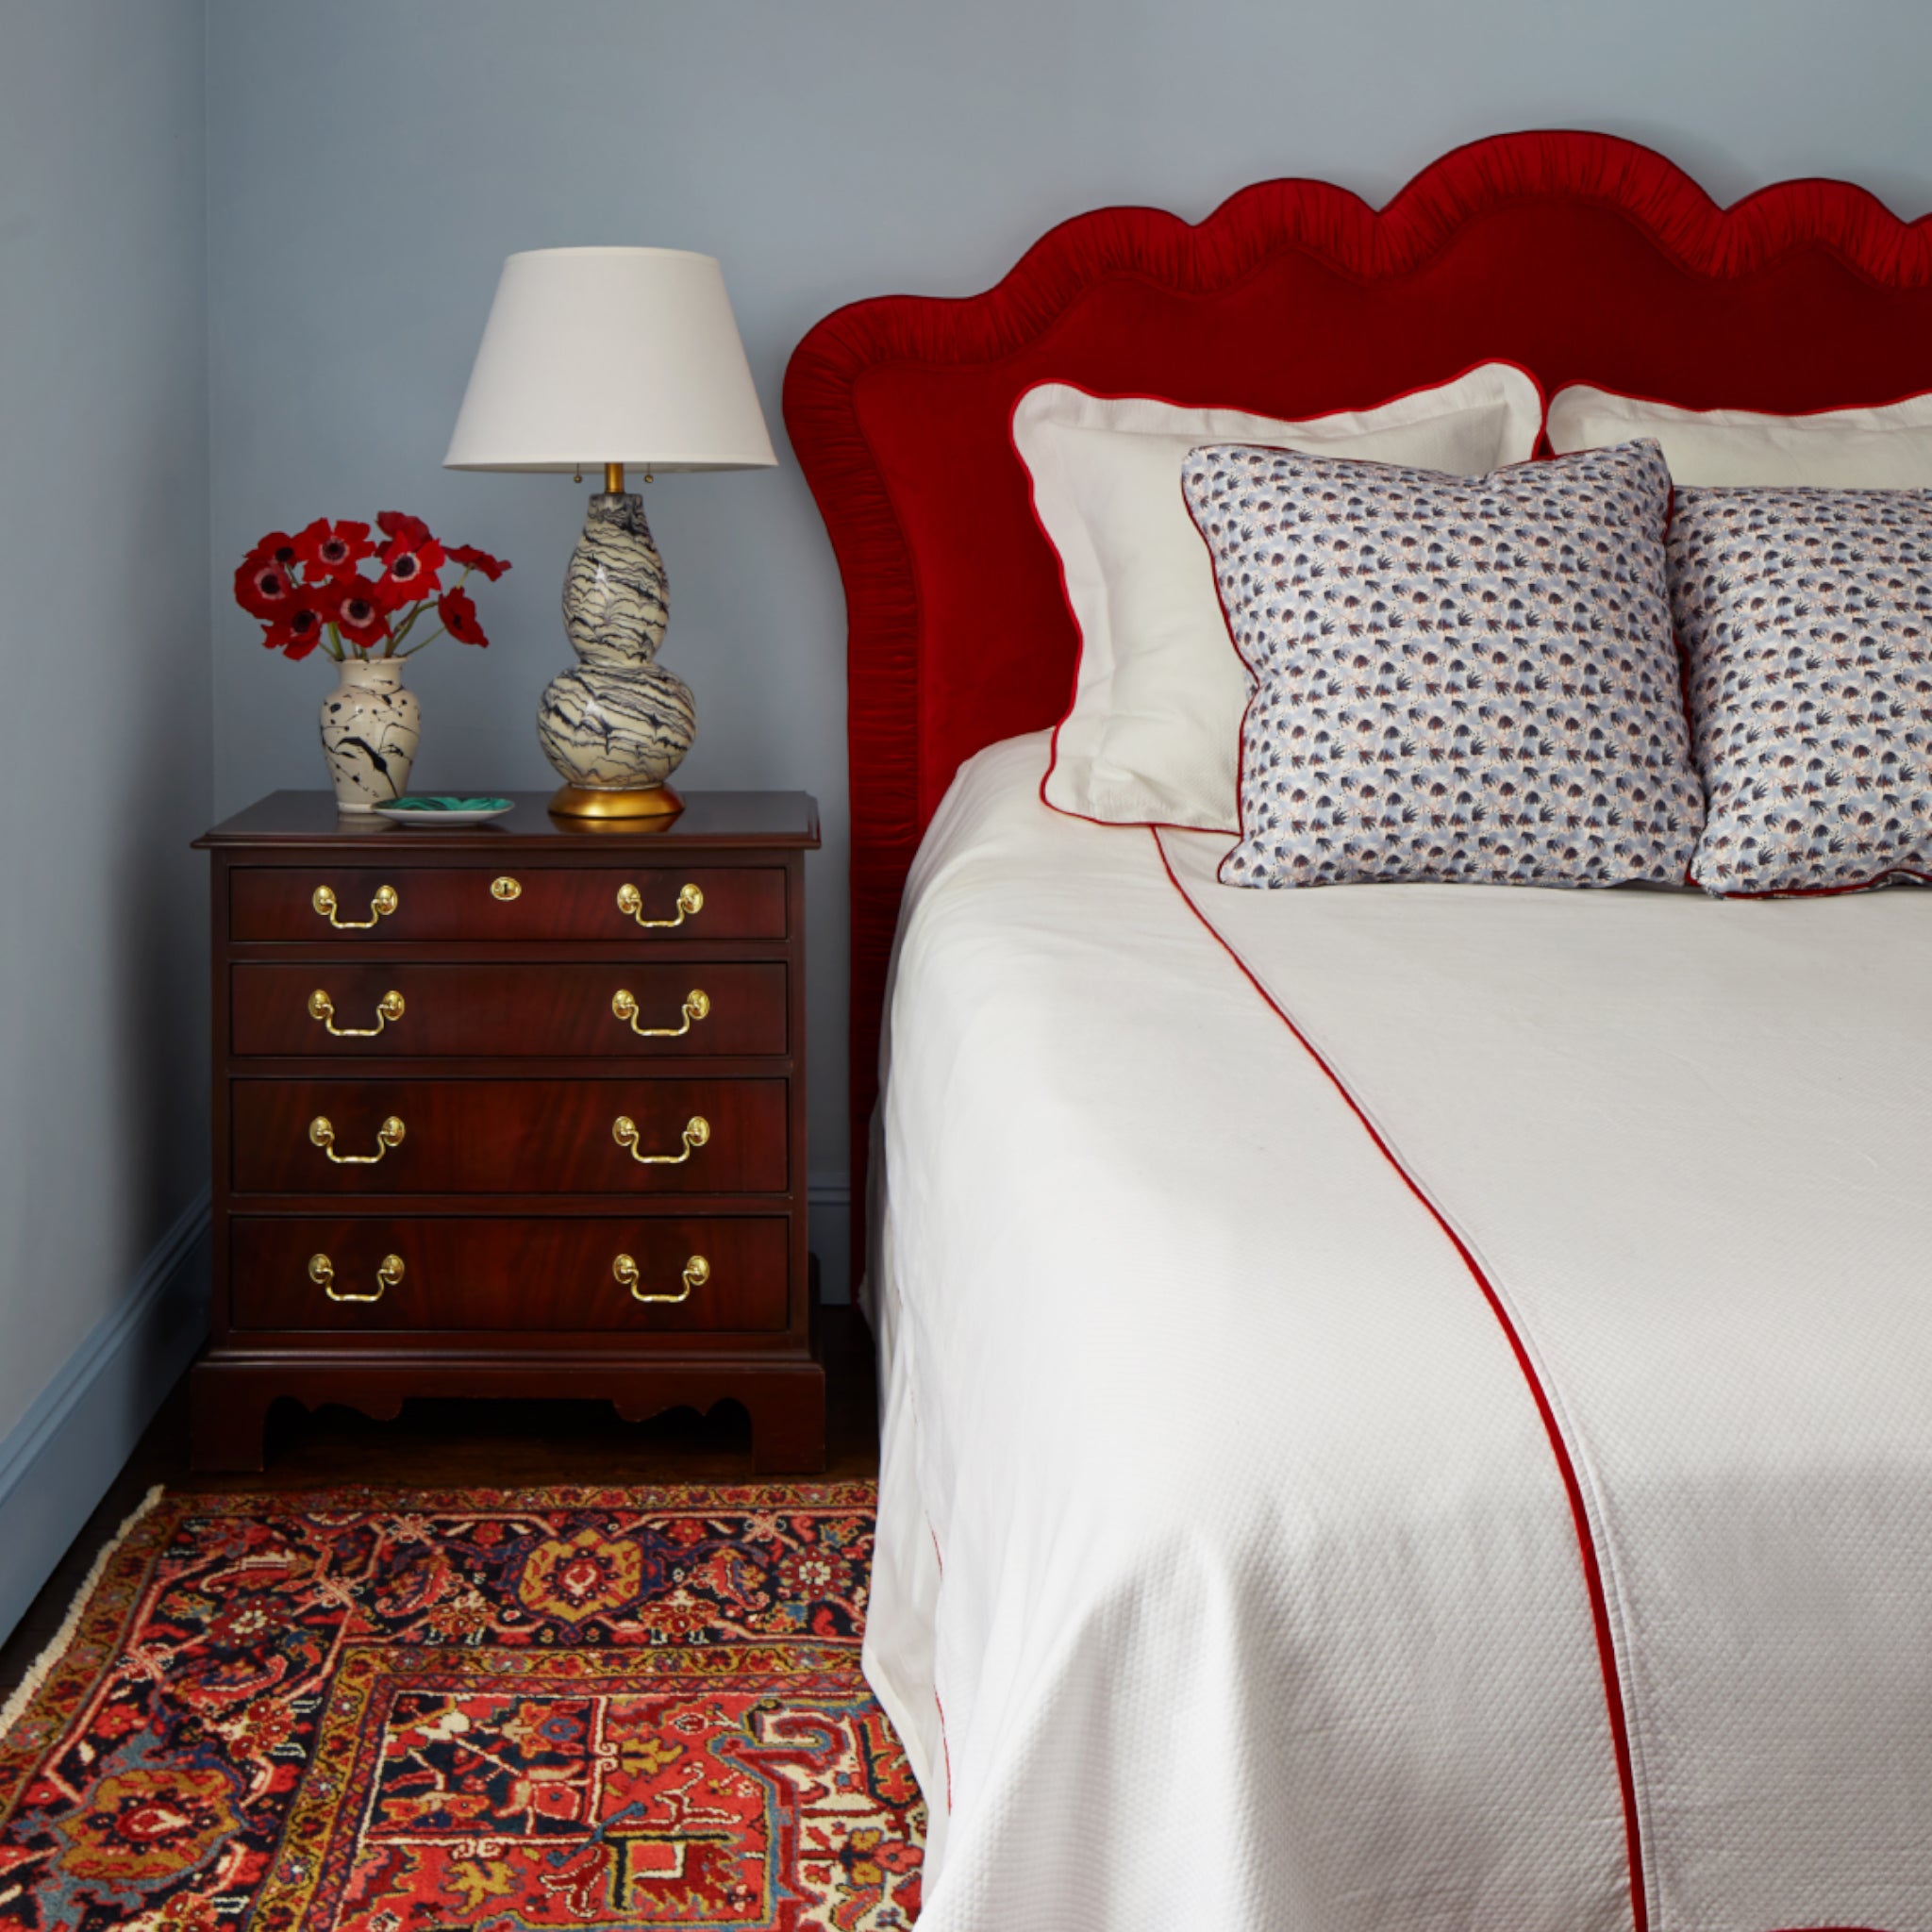 Bedroom styled with Red and Blue Printed Pillows on White bed with red headboard next to a wooden nightstand with white lamp and red flowers in vase on top